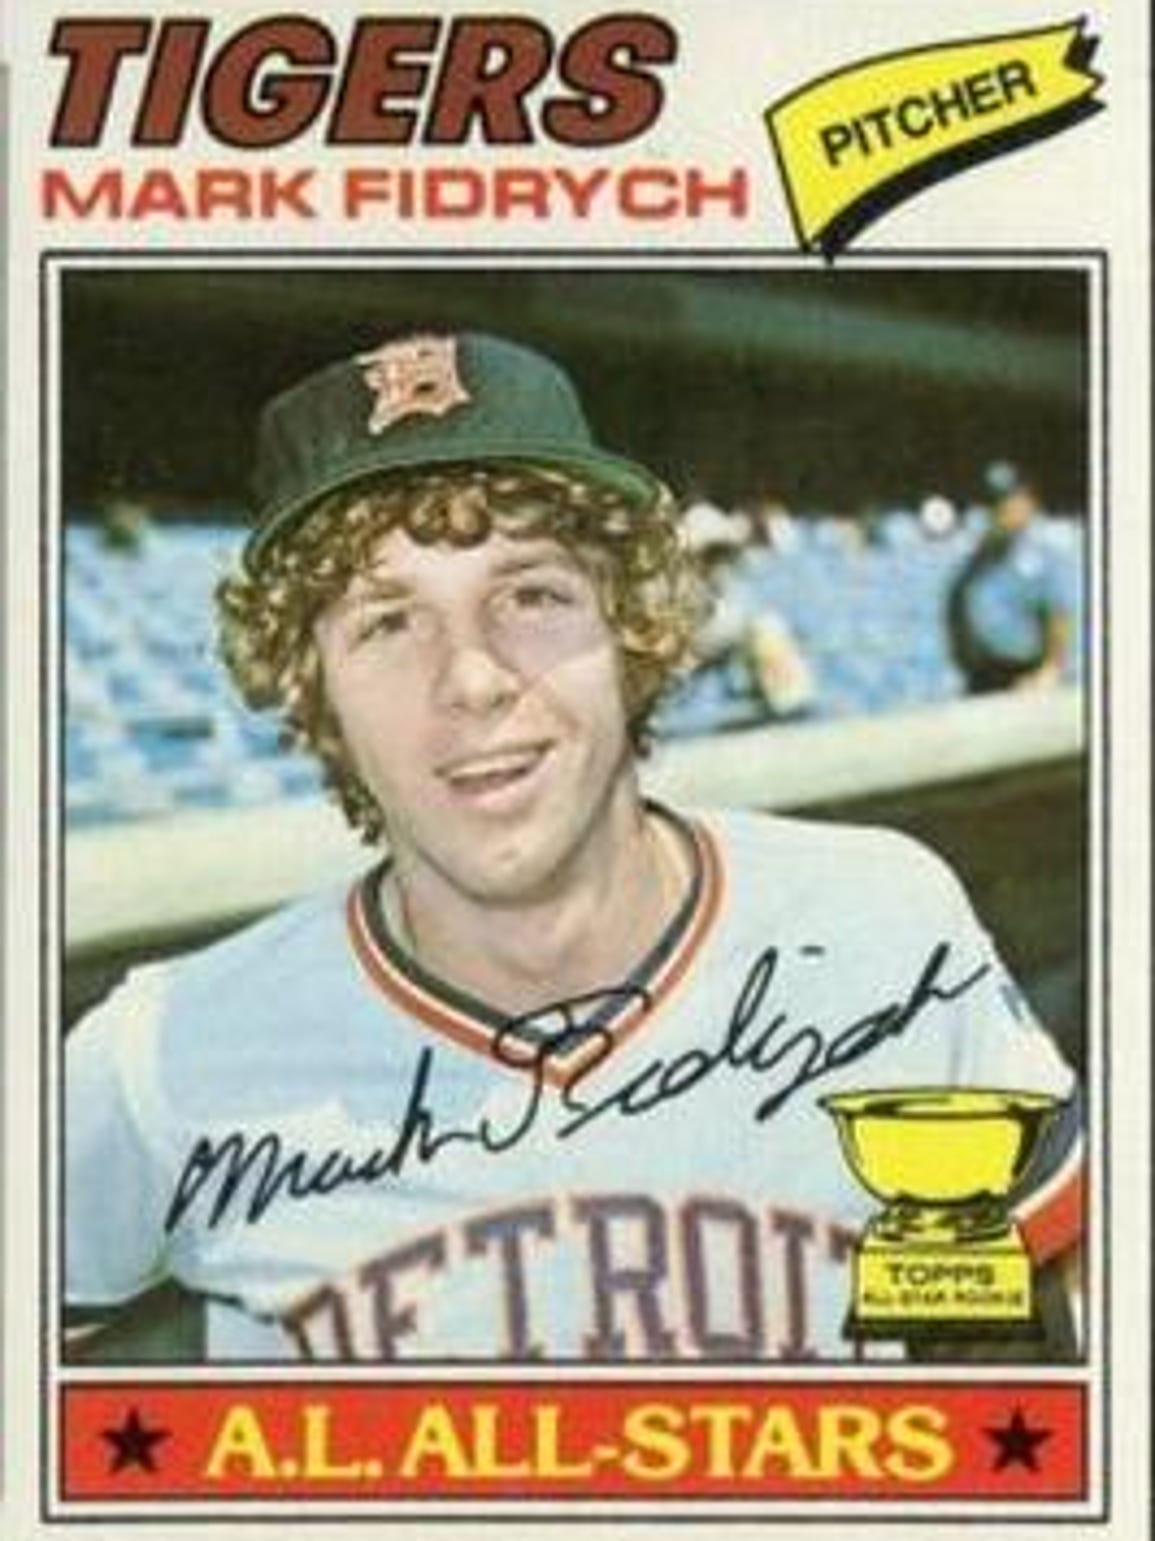 Fans were enthralled by Mark Fidrych’s schoolboy enthusiasm